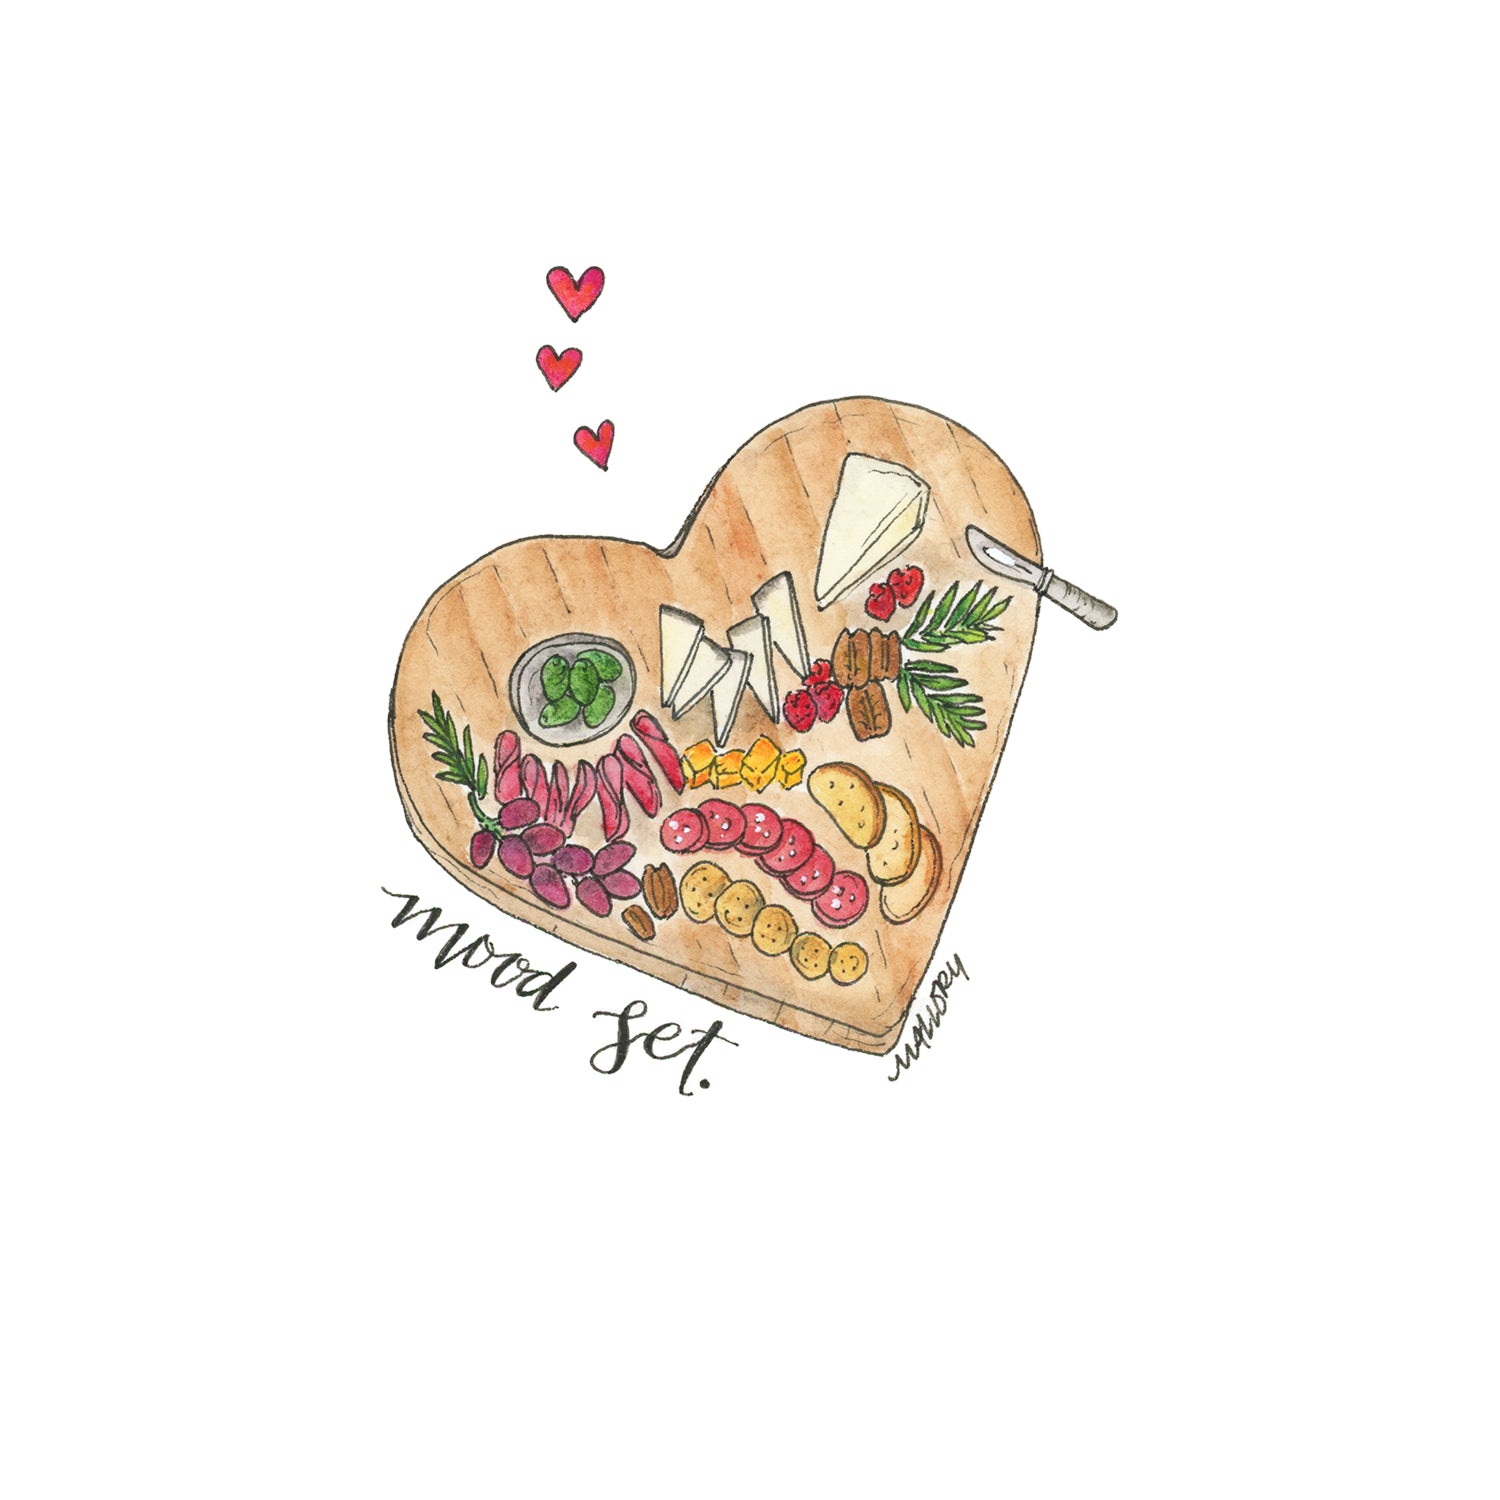 Image depicts a charcuterie board in the shape of a heart with fancy cheeses, cured meats, berries and herbs. Little red hearts are above the charcuterie board. "Mood set" is hand-lettered on the card to signify "setting the mood" for Valentine's Day.